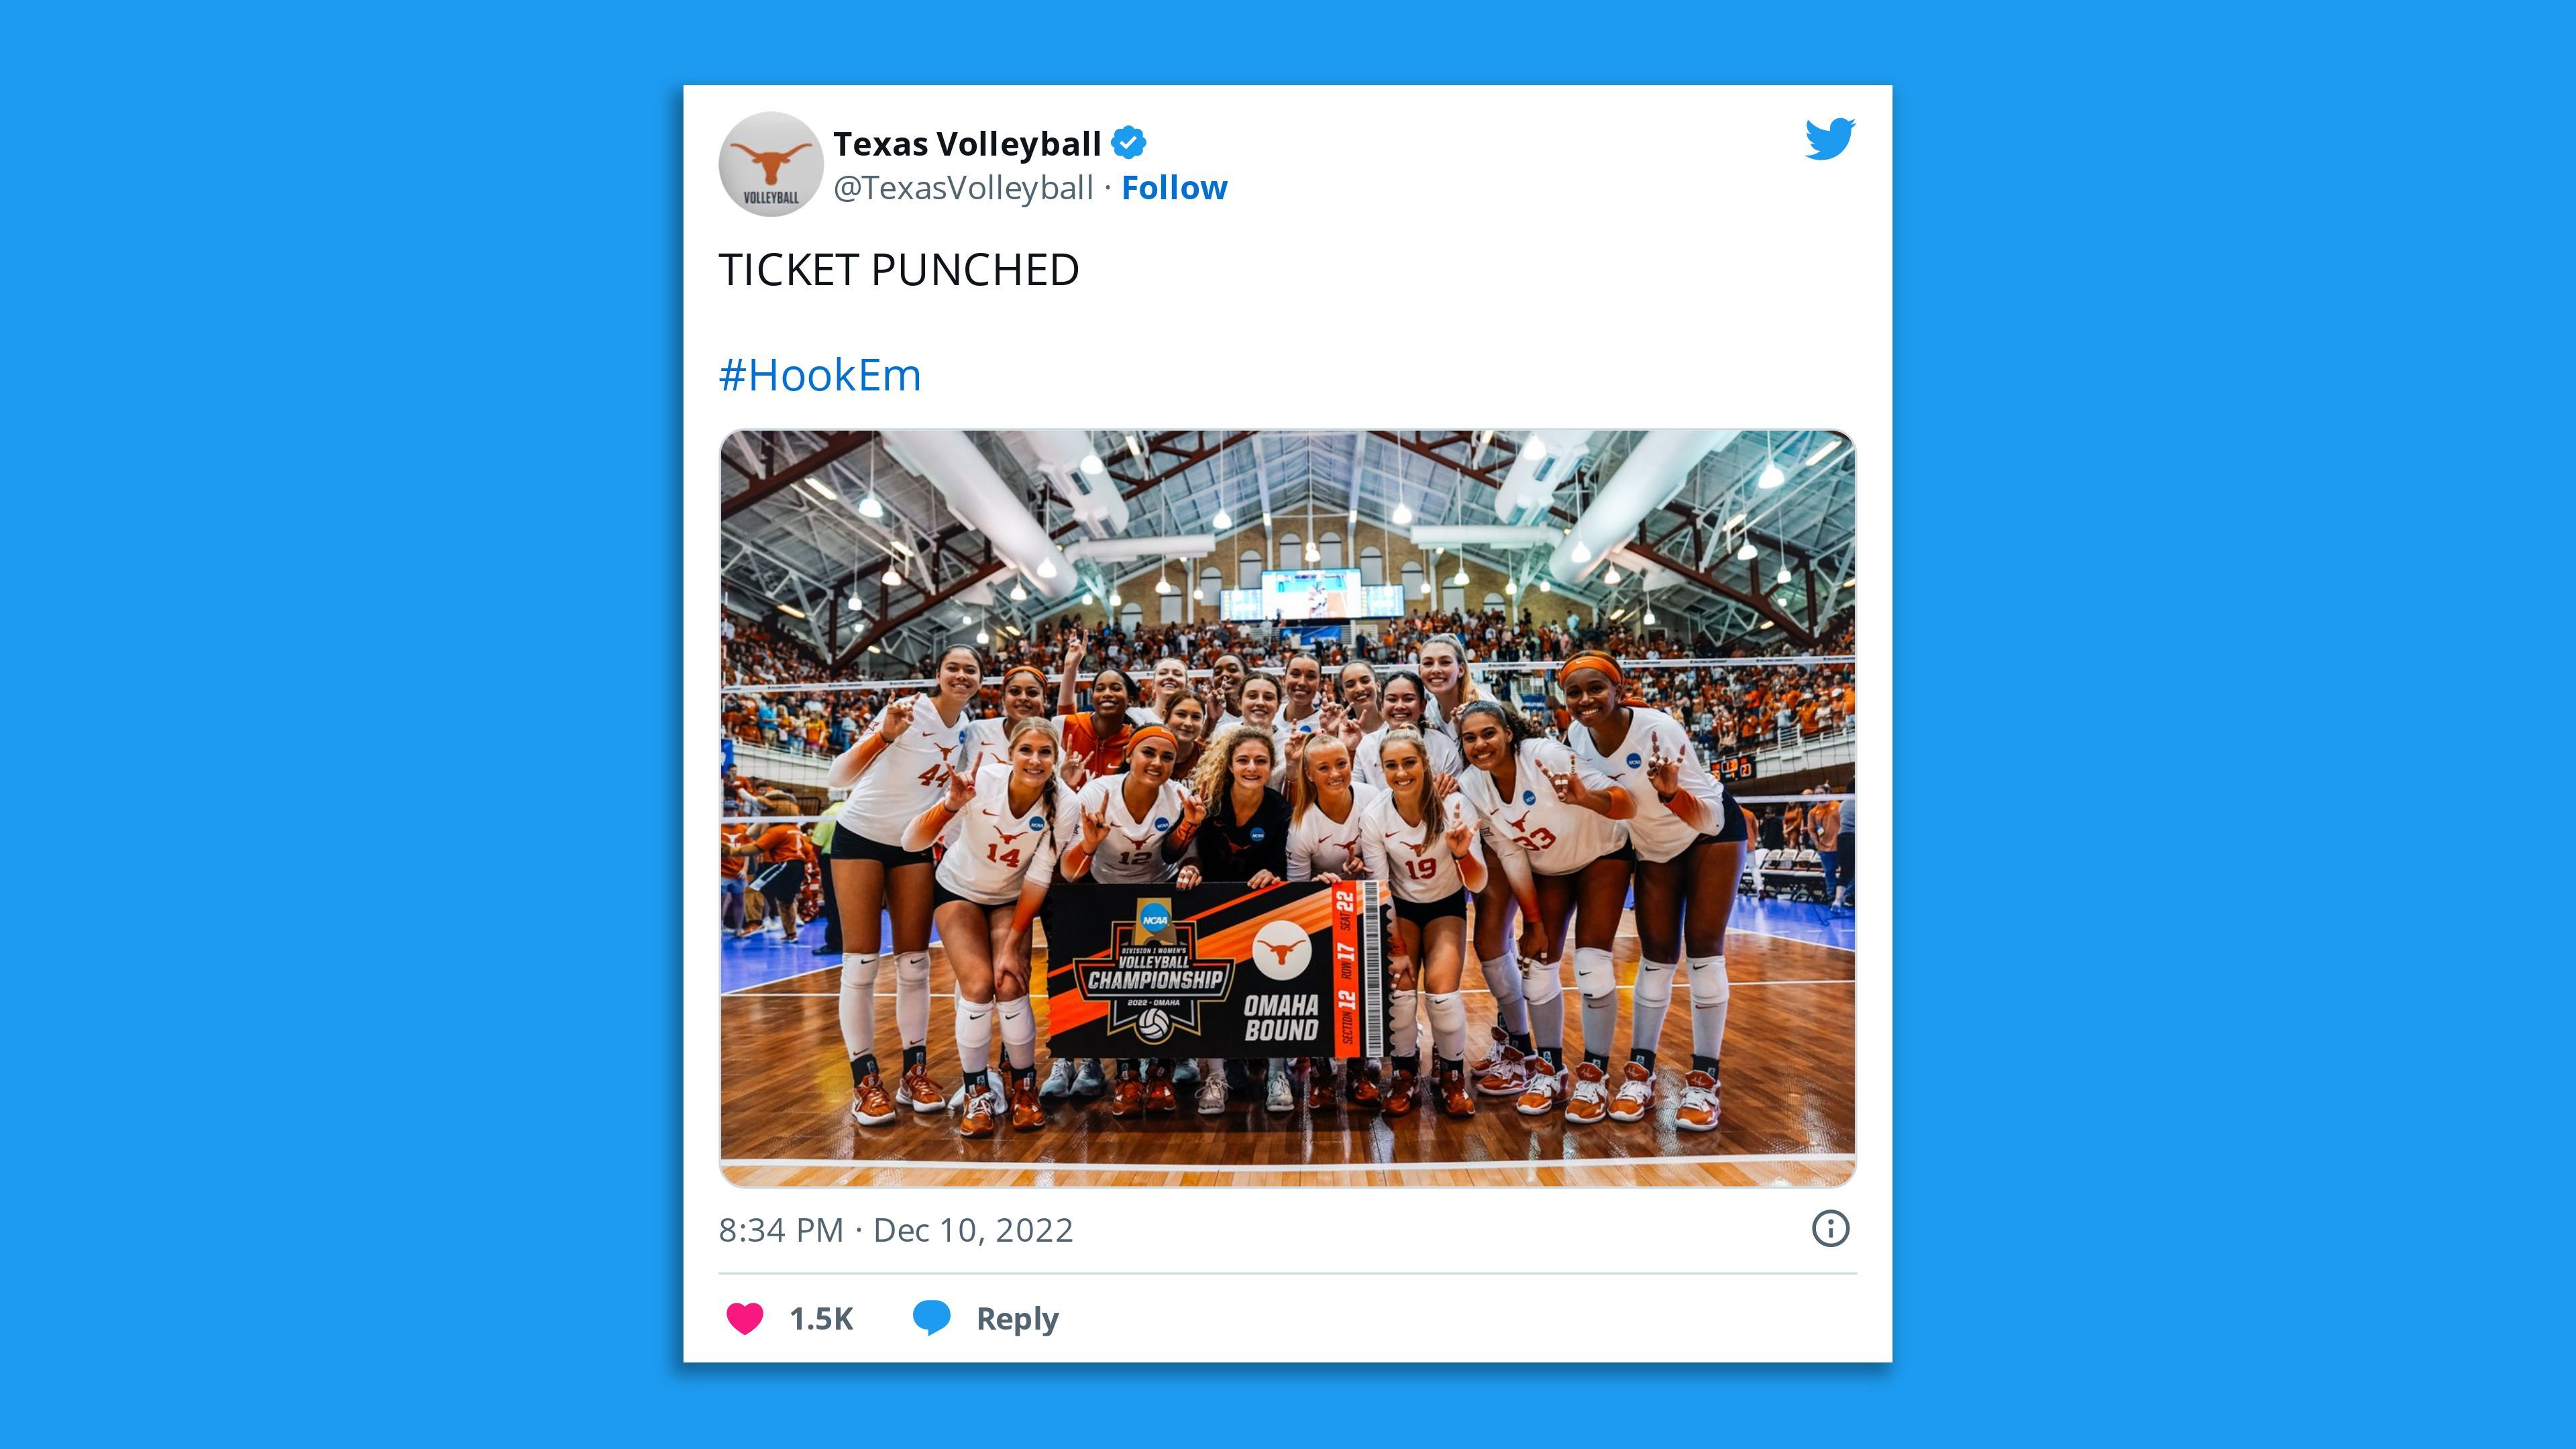 The UT volleyball team celebrates their qualification for the Final Four, via Twitter screenshot.